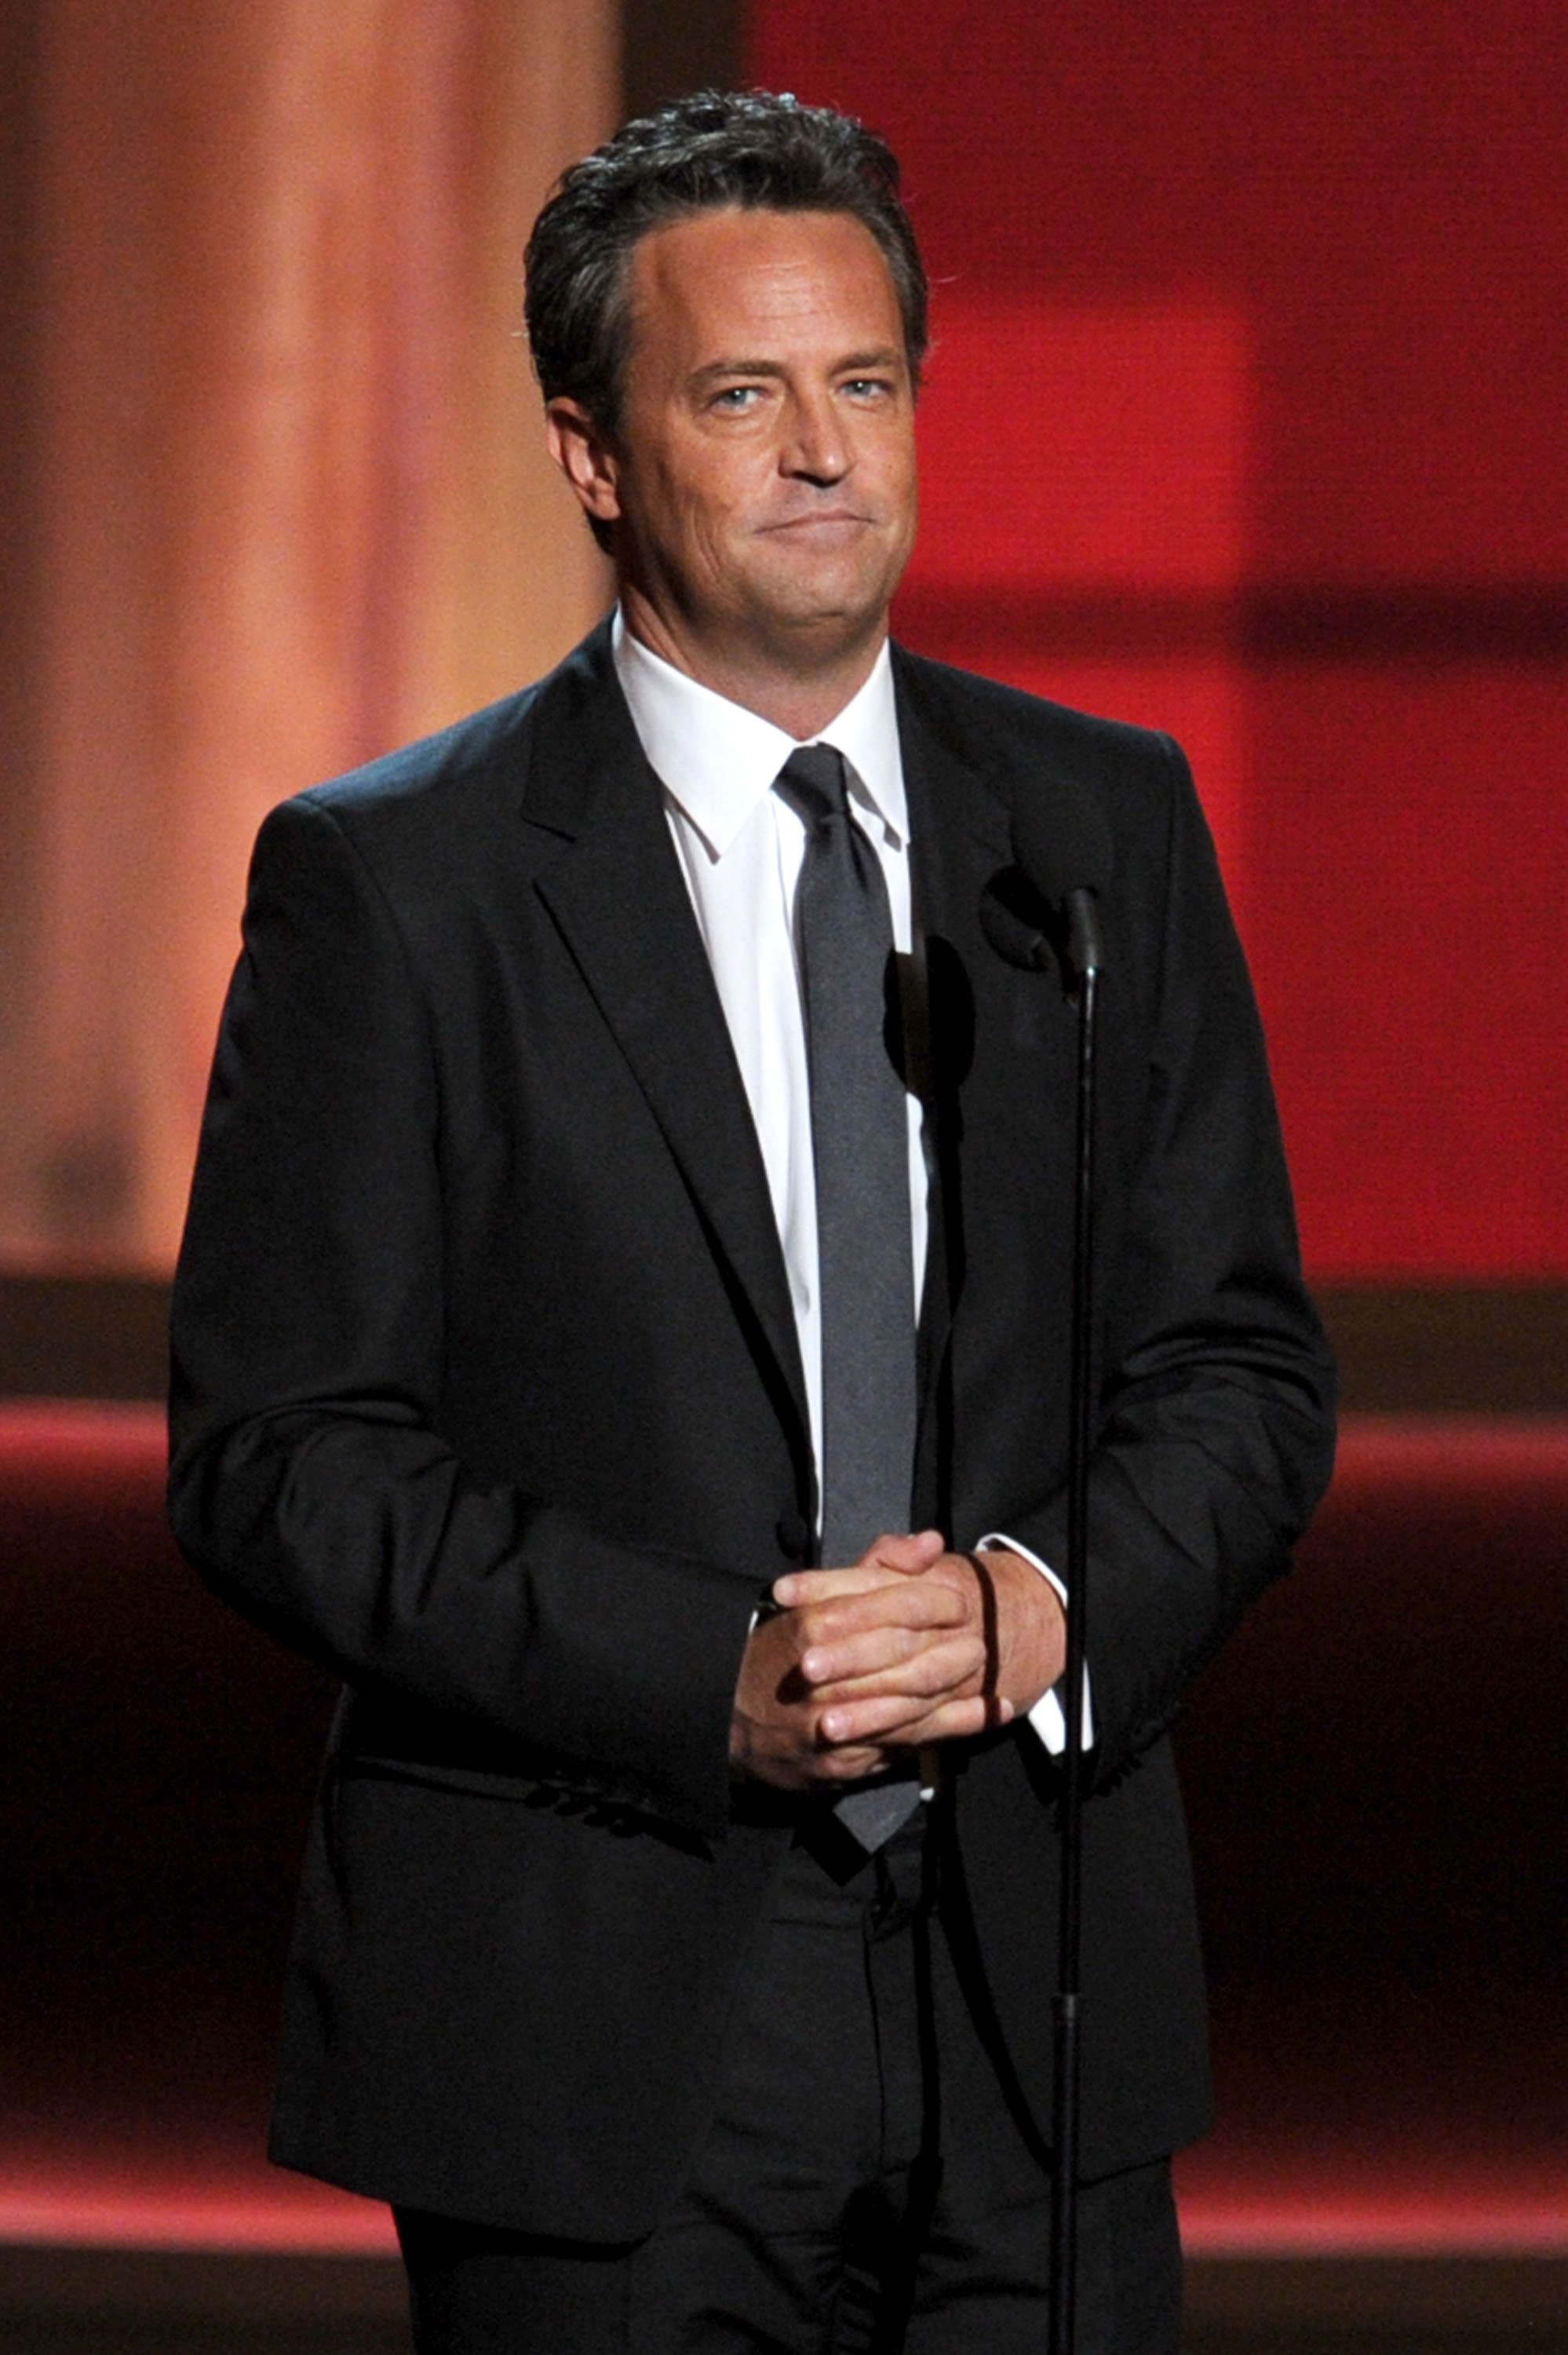 Matthew Perry’s Death: Drug-Dealing Underworld Exposed, Authorities ‘Have a List of Suspects’